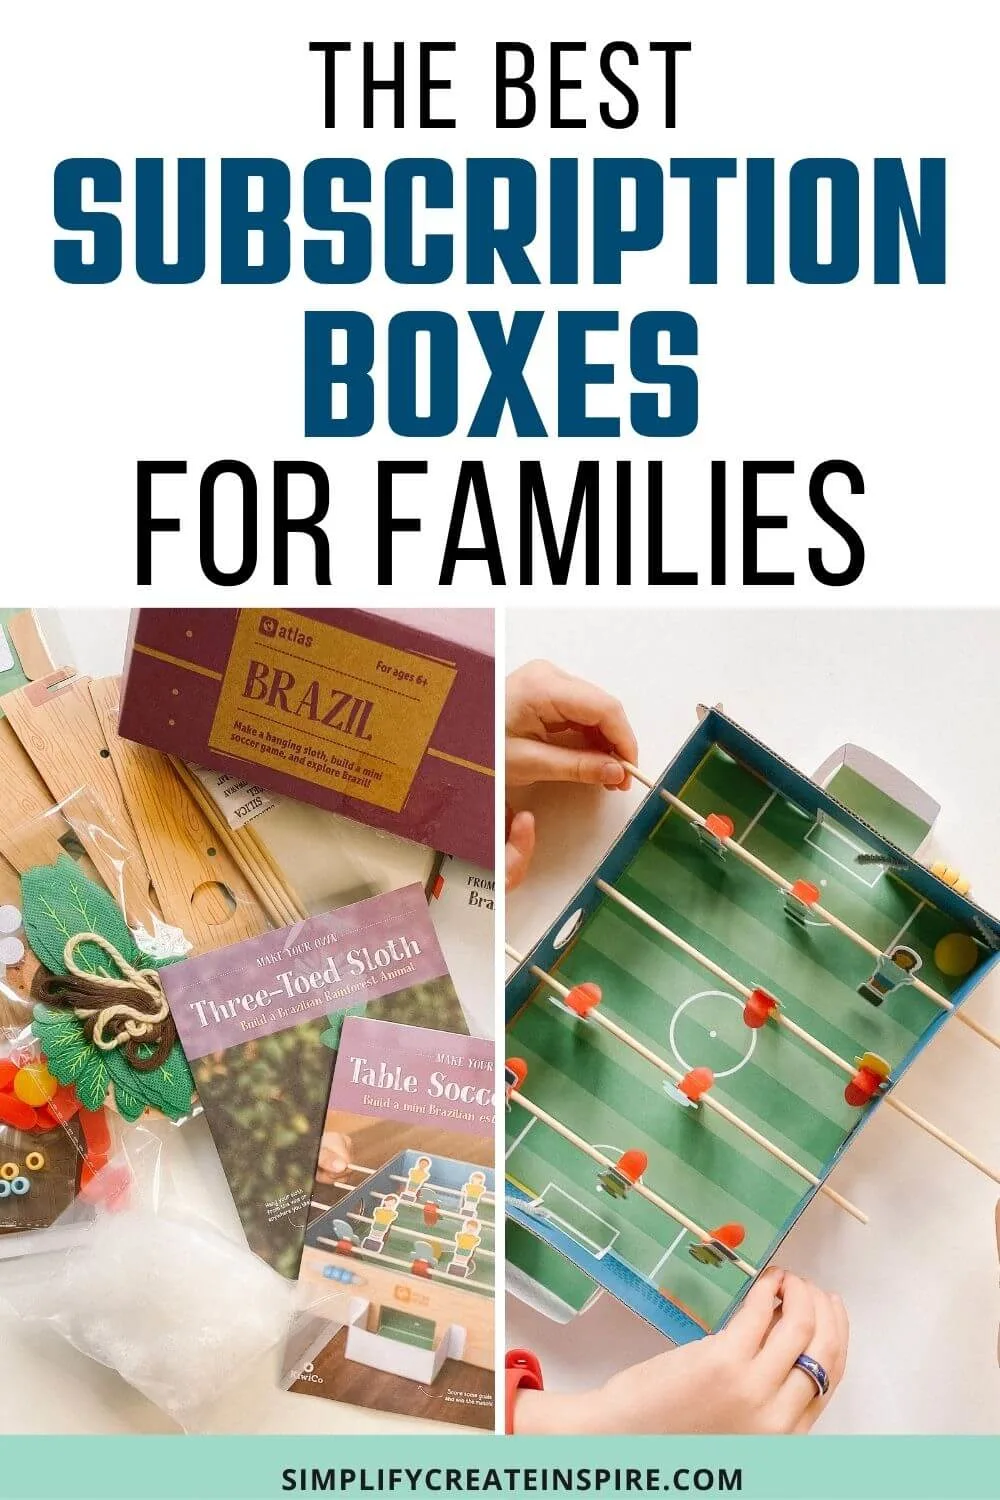 The best subscription boxes for families